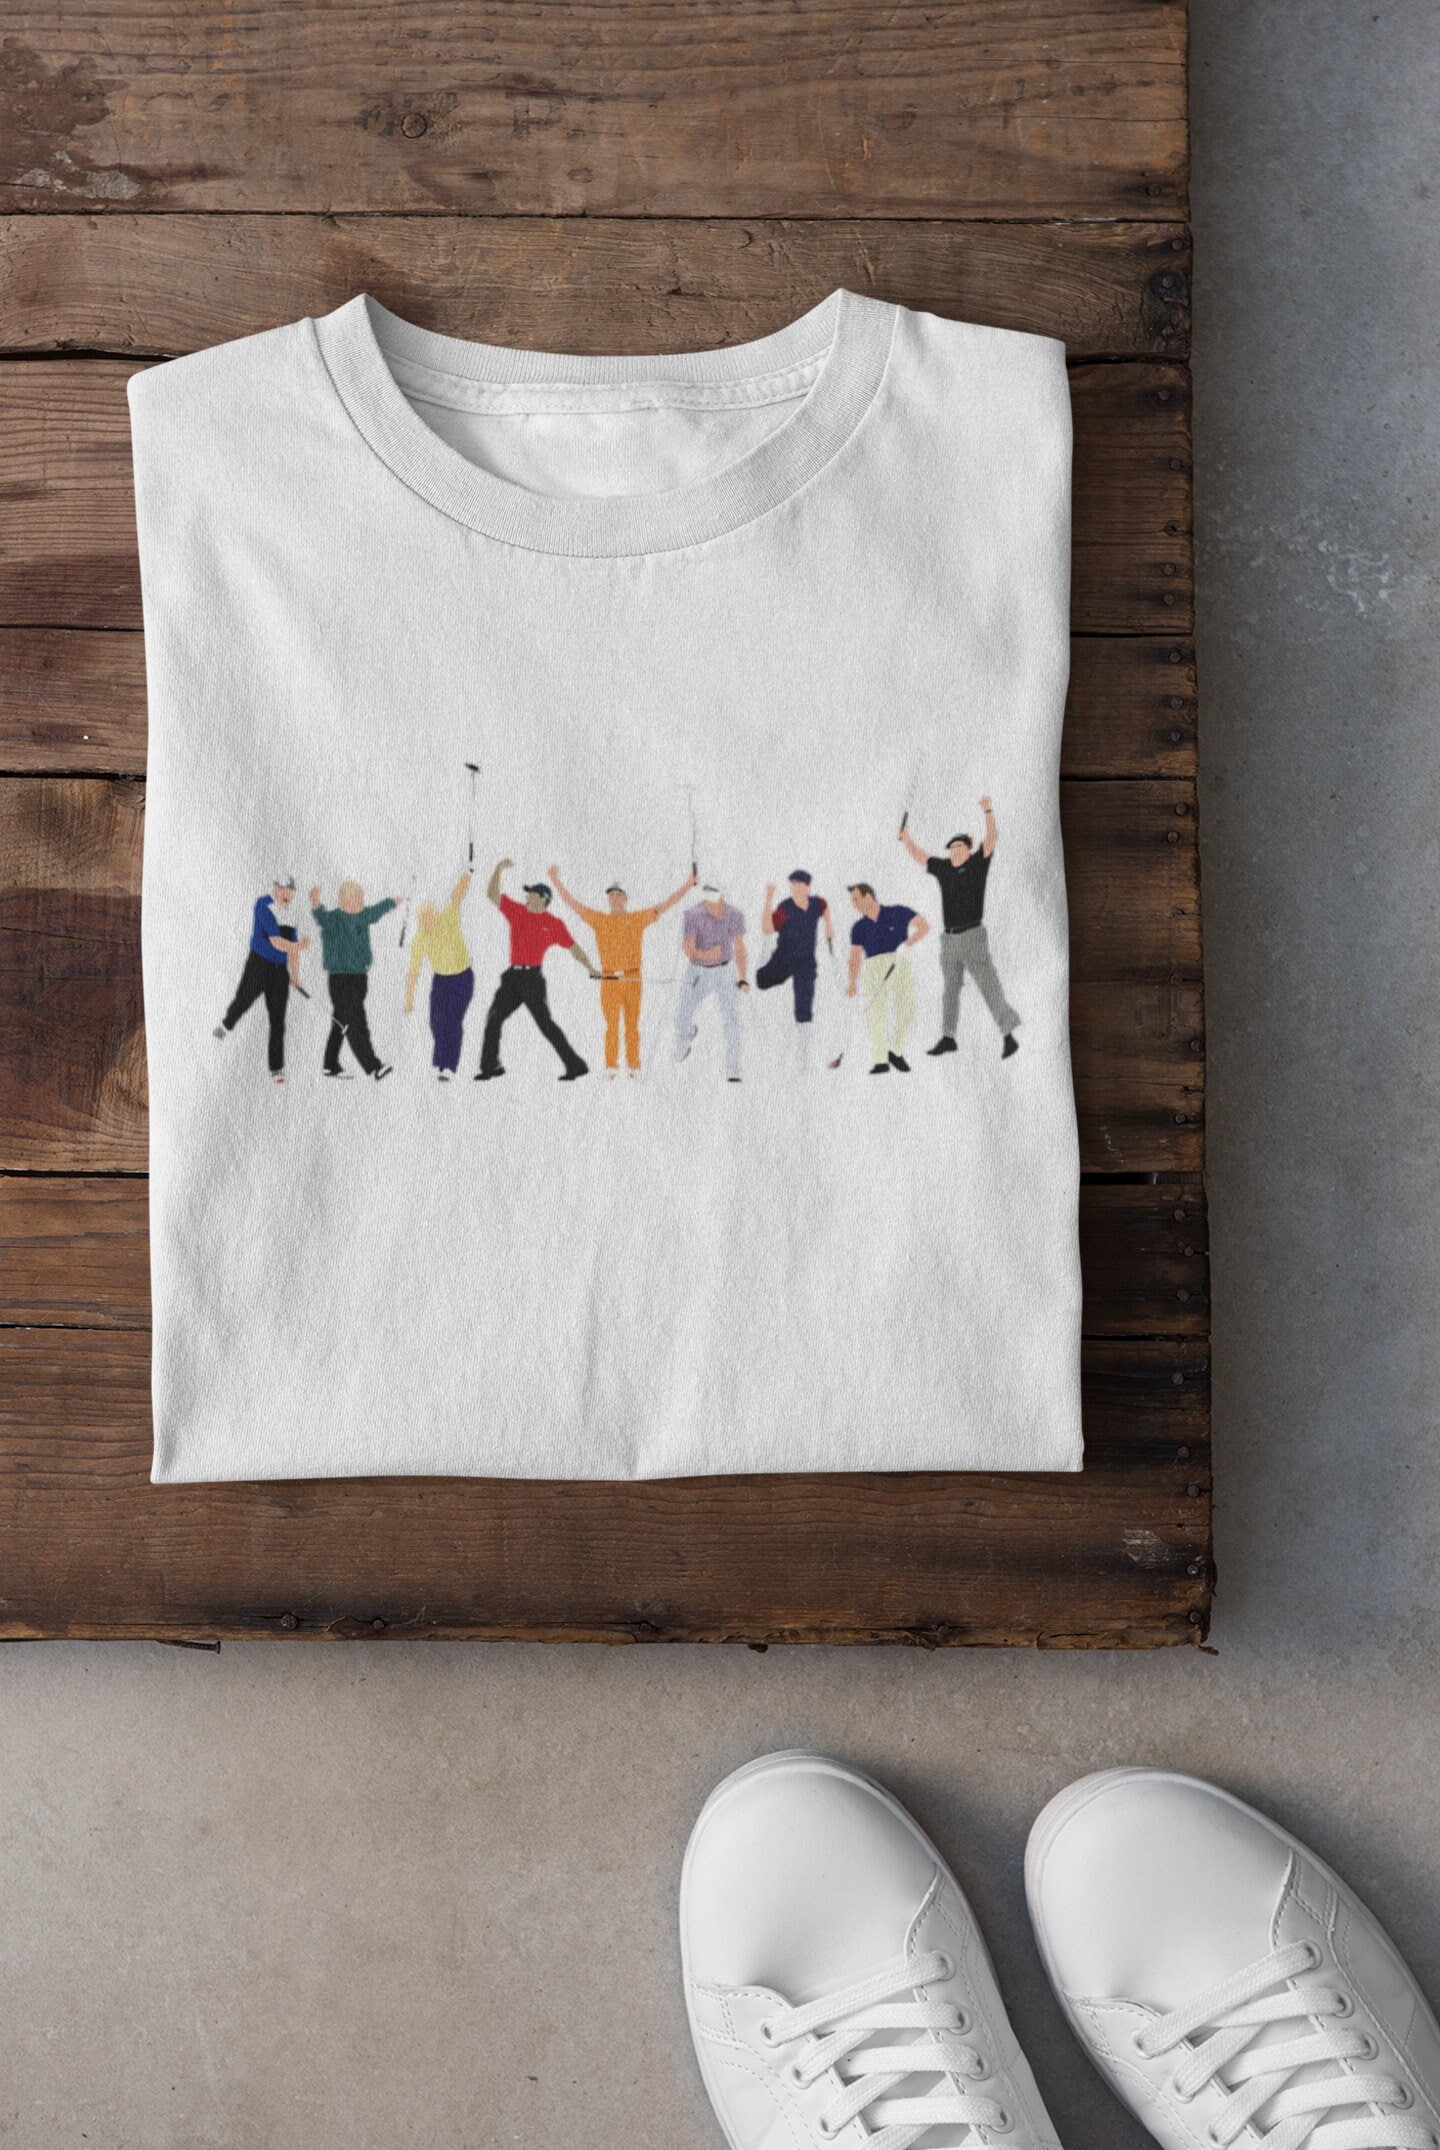 Golf Legends T-Shirt, Player Hoodie, Augusta Sweater, Pga Tee, Ball Gift, Golfer Clothes, Major Championship Top, Funny Gift